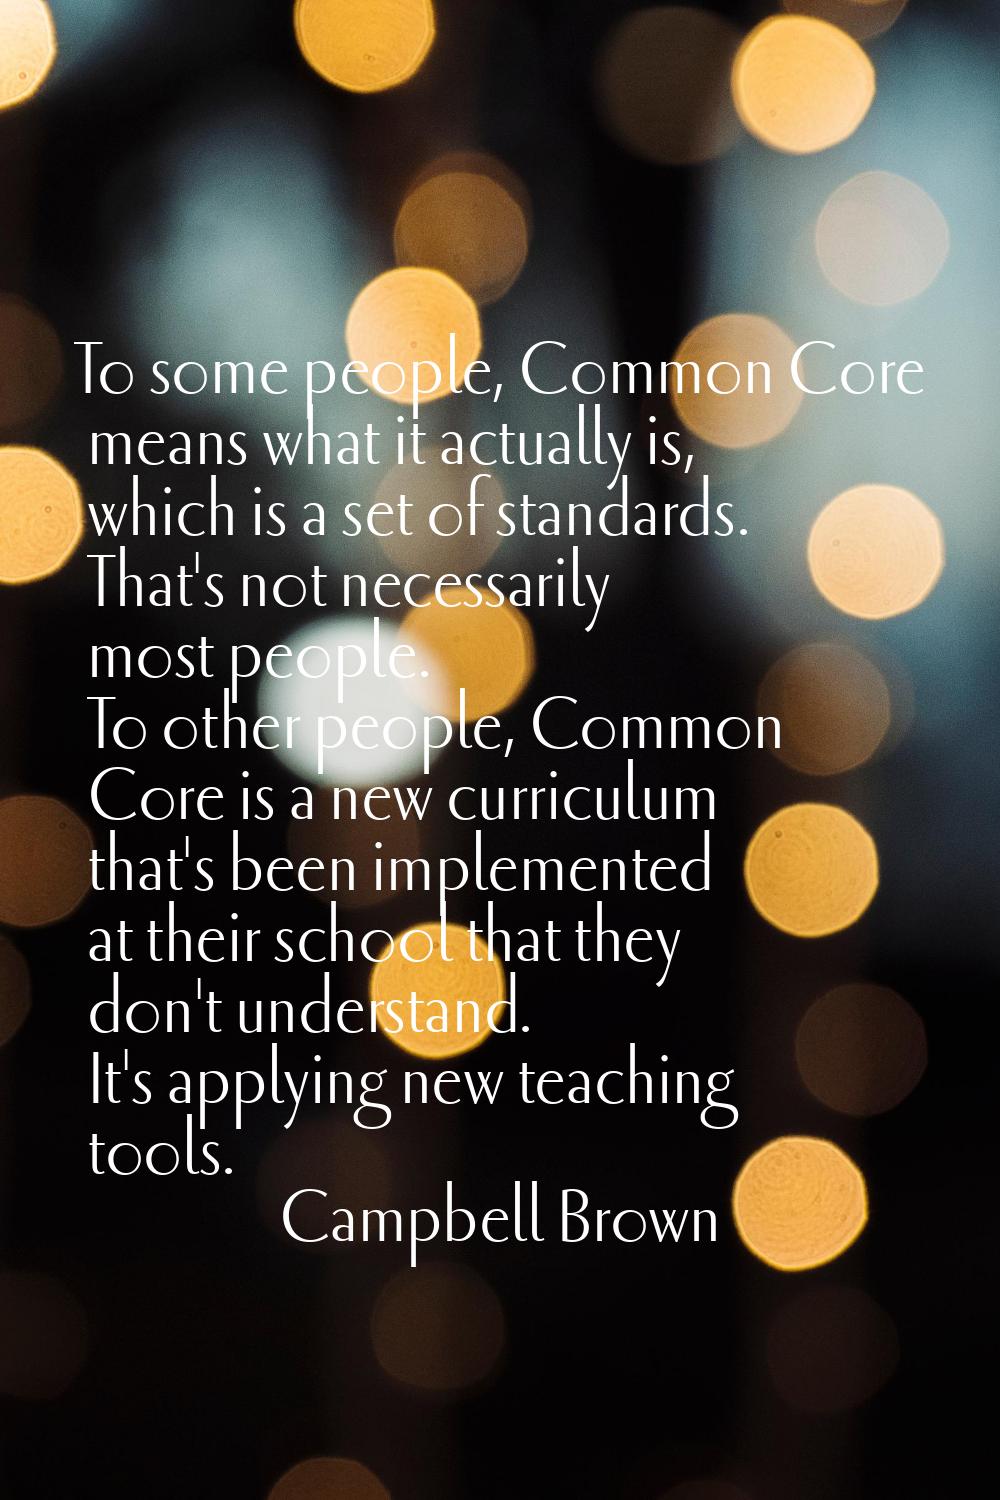 To some people, Common Core means what it actually is, which is a set of standards. That's not nece